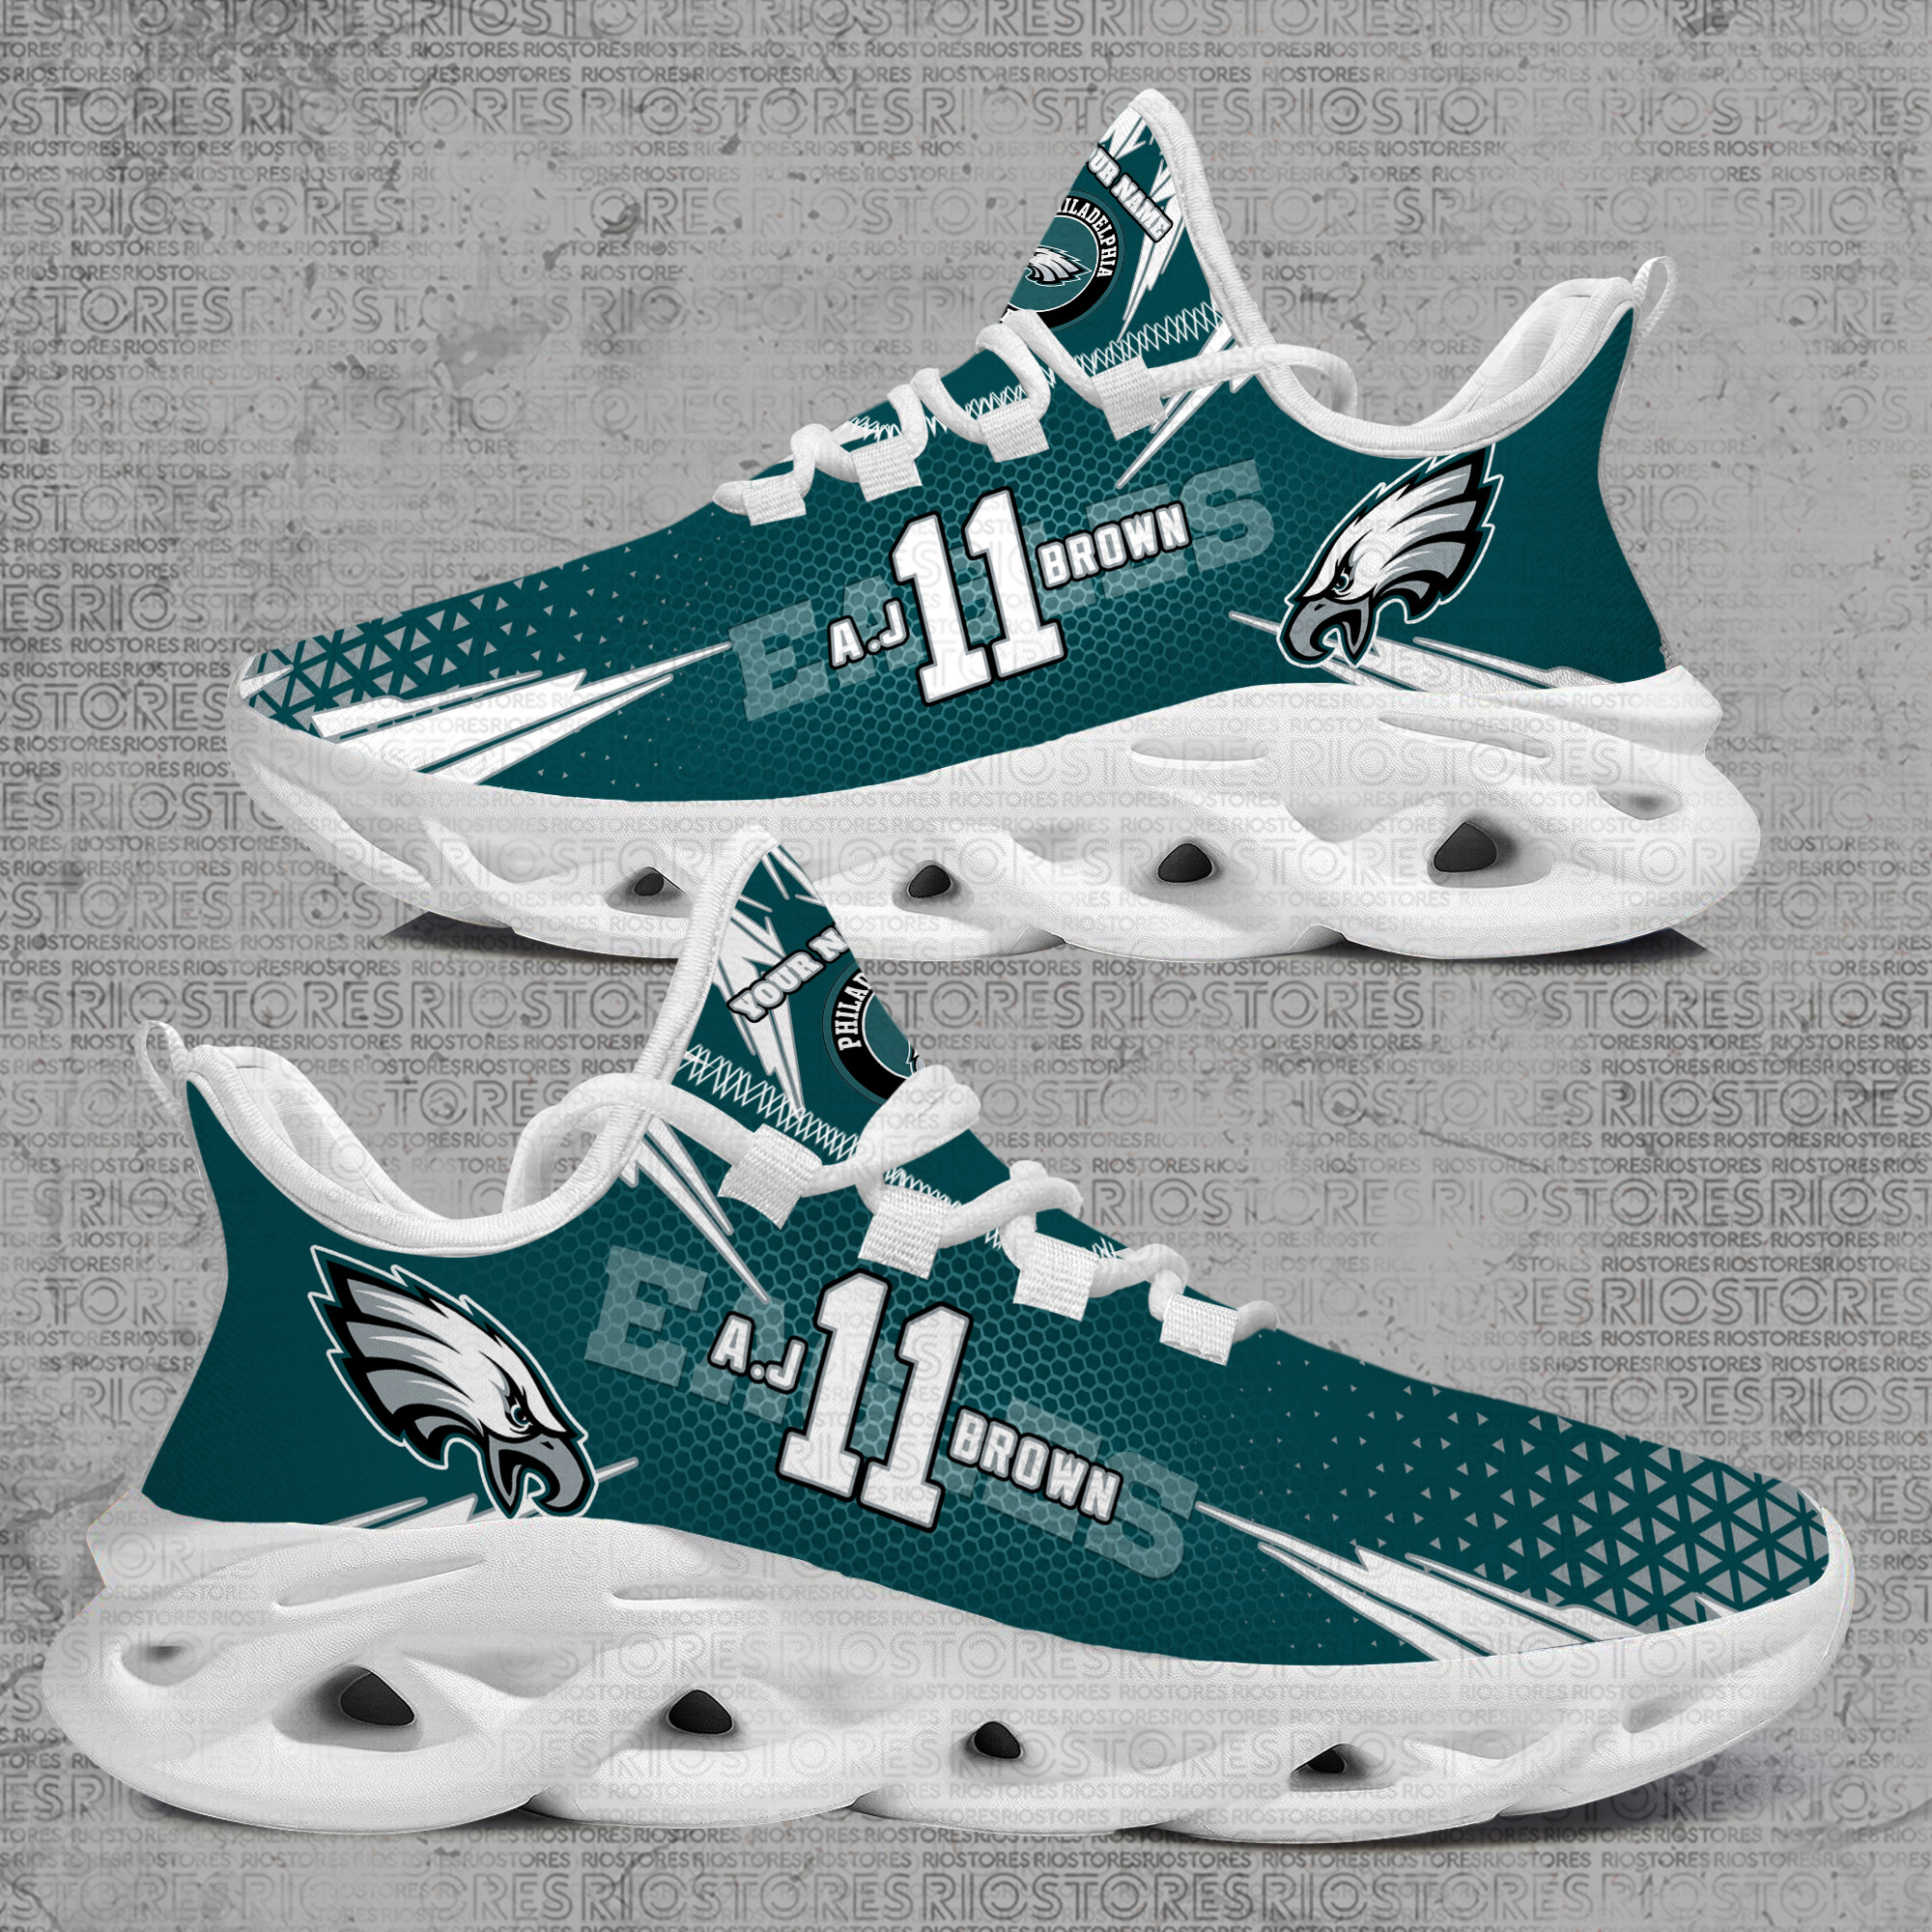 A J Brown Phil_eagles Football Customize Sporty Max Soul Sneakers Running Sport For Men For Fan